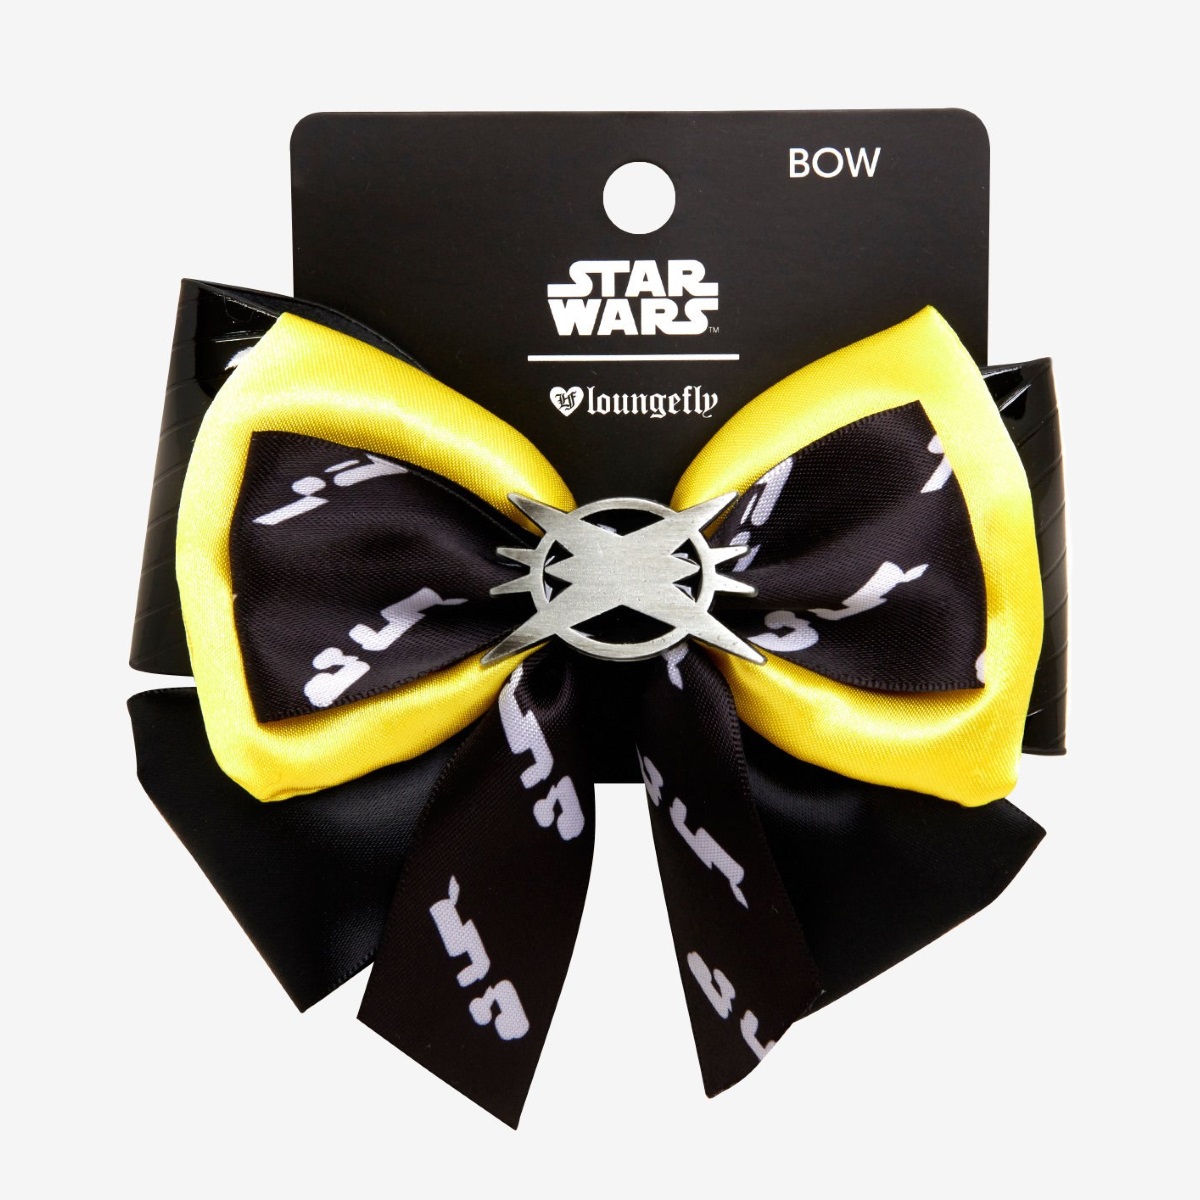 Loungefly x Star Wars Solo Lando Calrissian Cosplay Style Hair Bow at Hot Topic